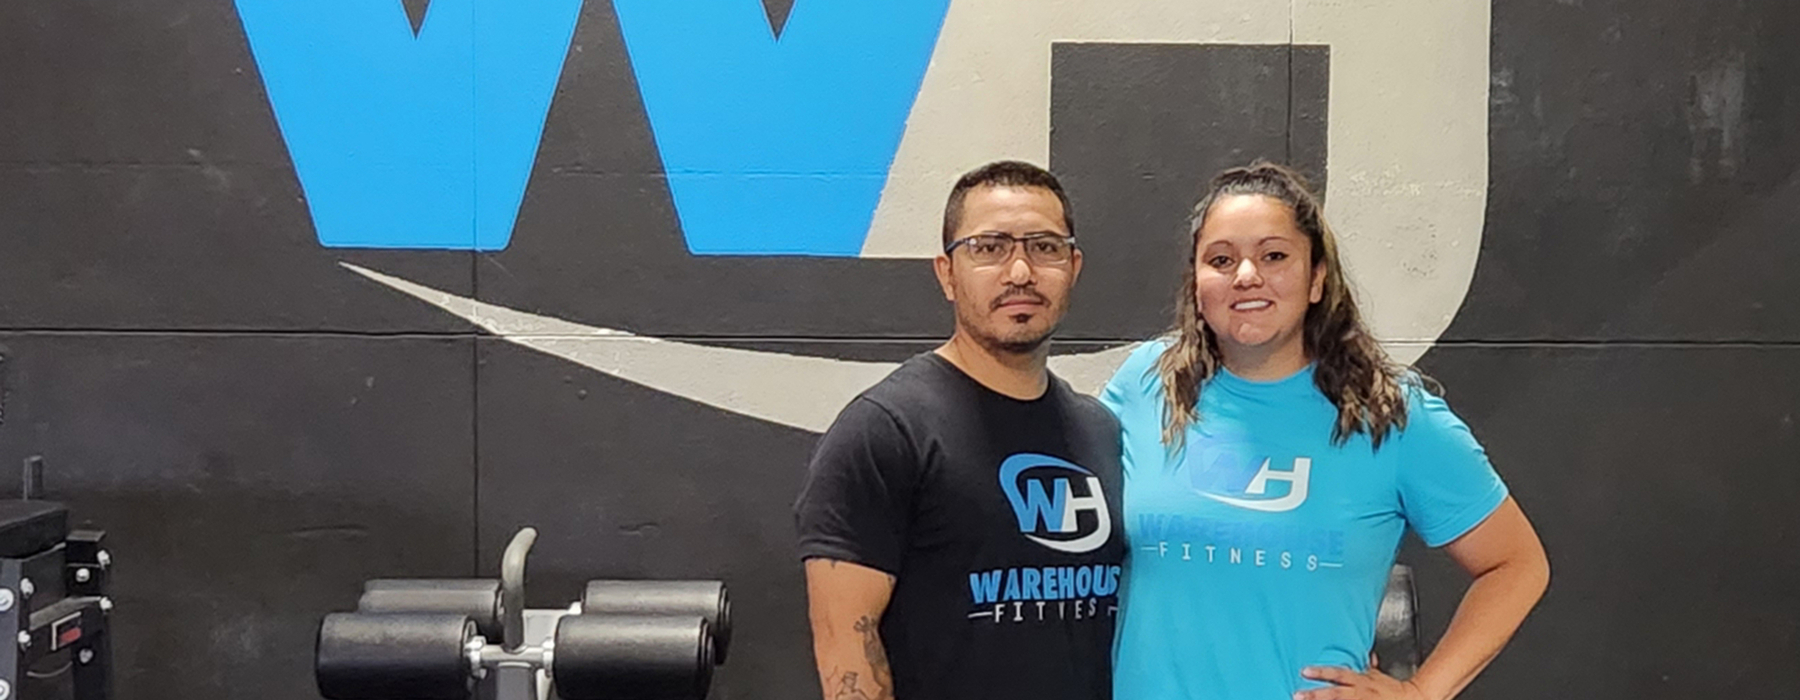 Man and woman wearing shirts that say "Warehouse Fitness" standing next to exercise equipment in front of a black wall with "WH"